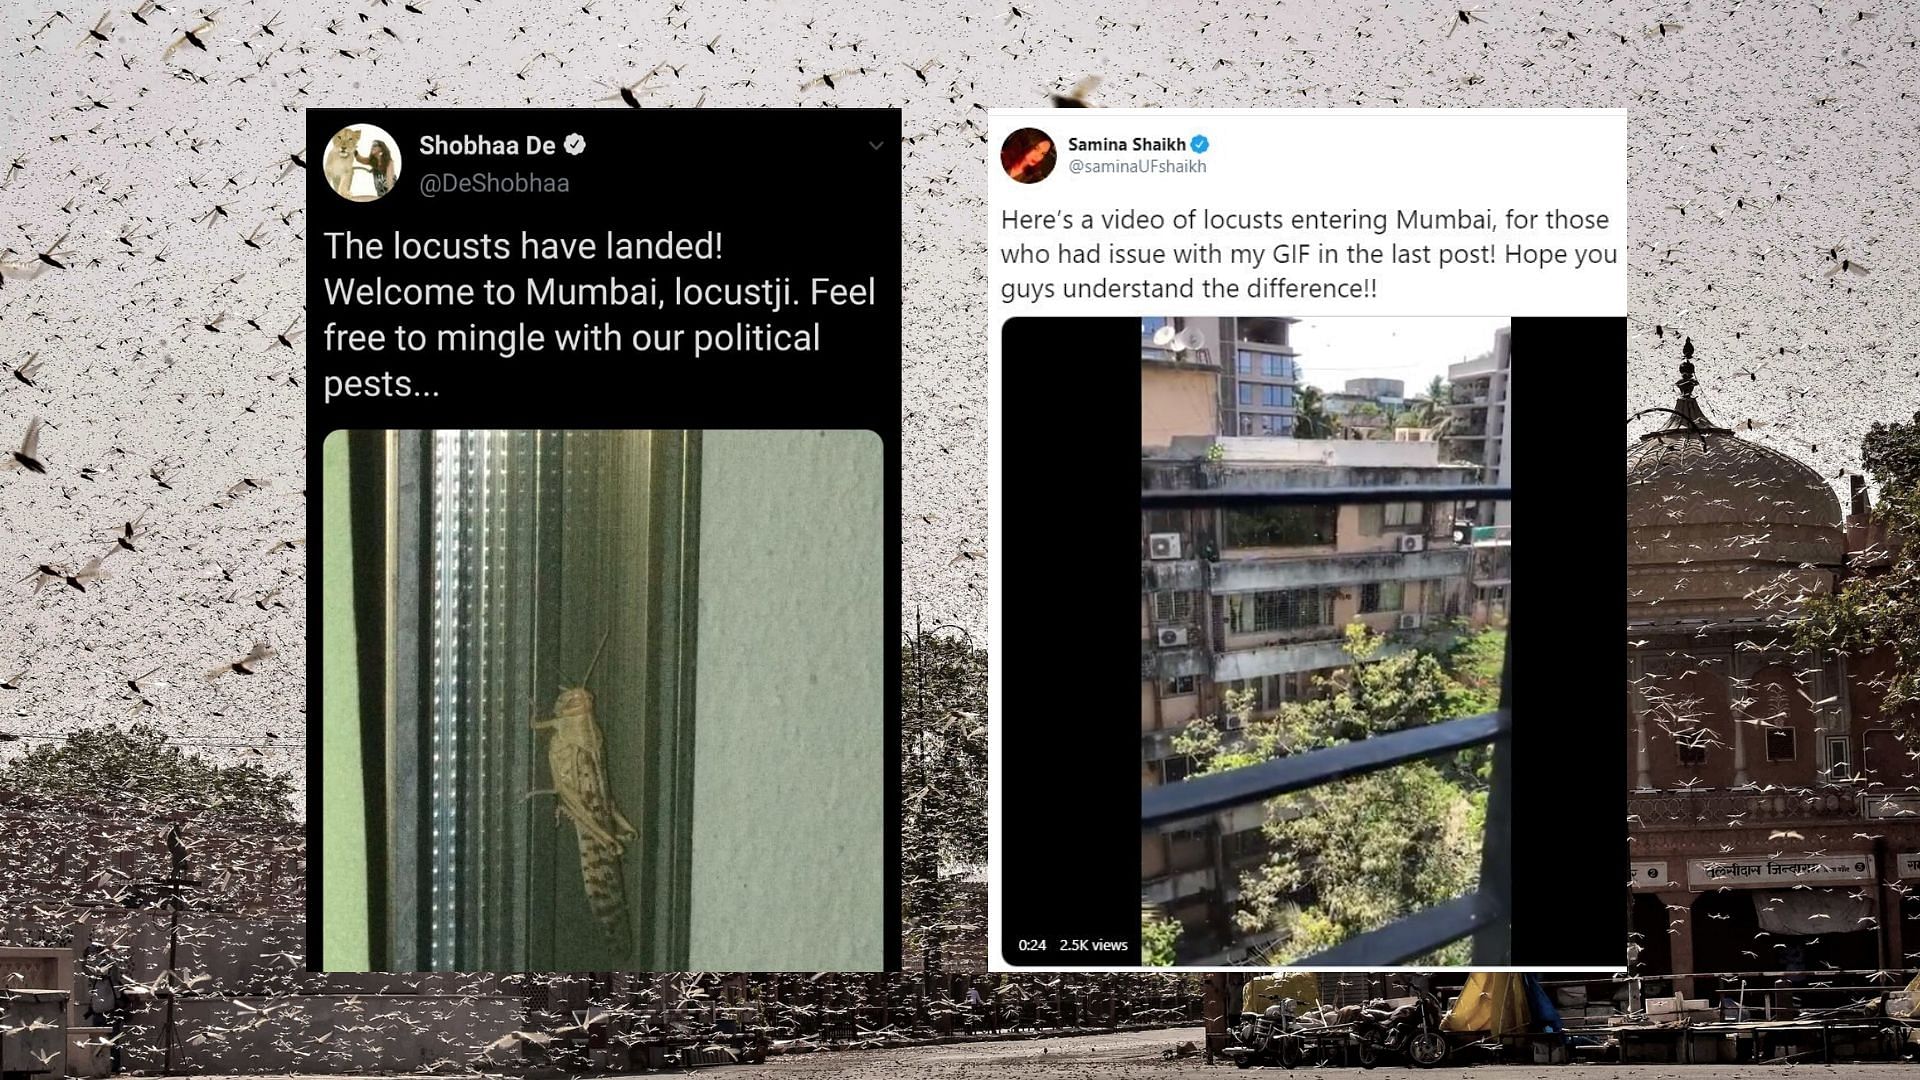 Several Mumbaikars on Thursday, 28 May, posted images and videos of a locust attack in Mumbai.